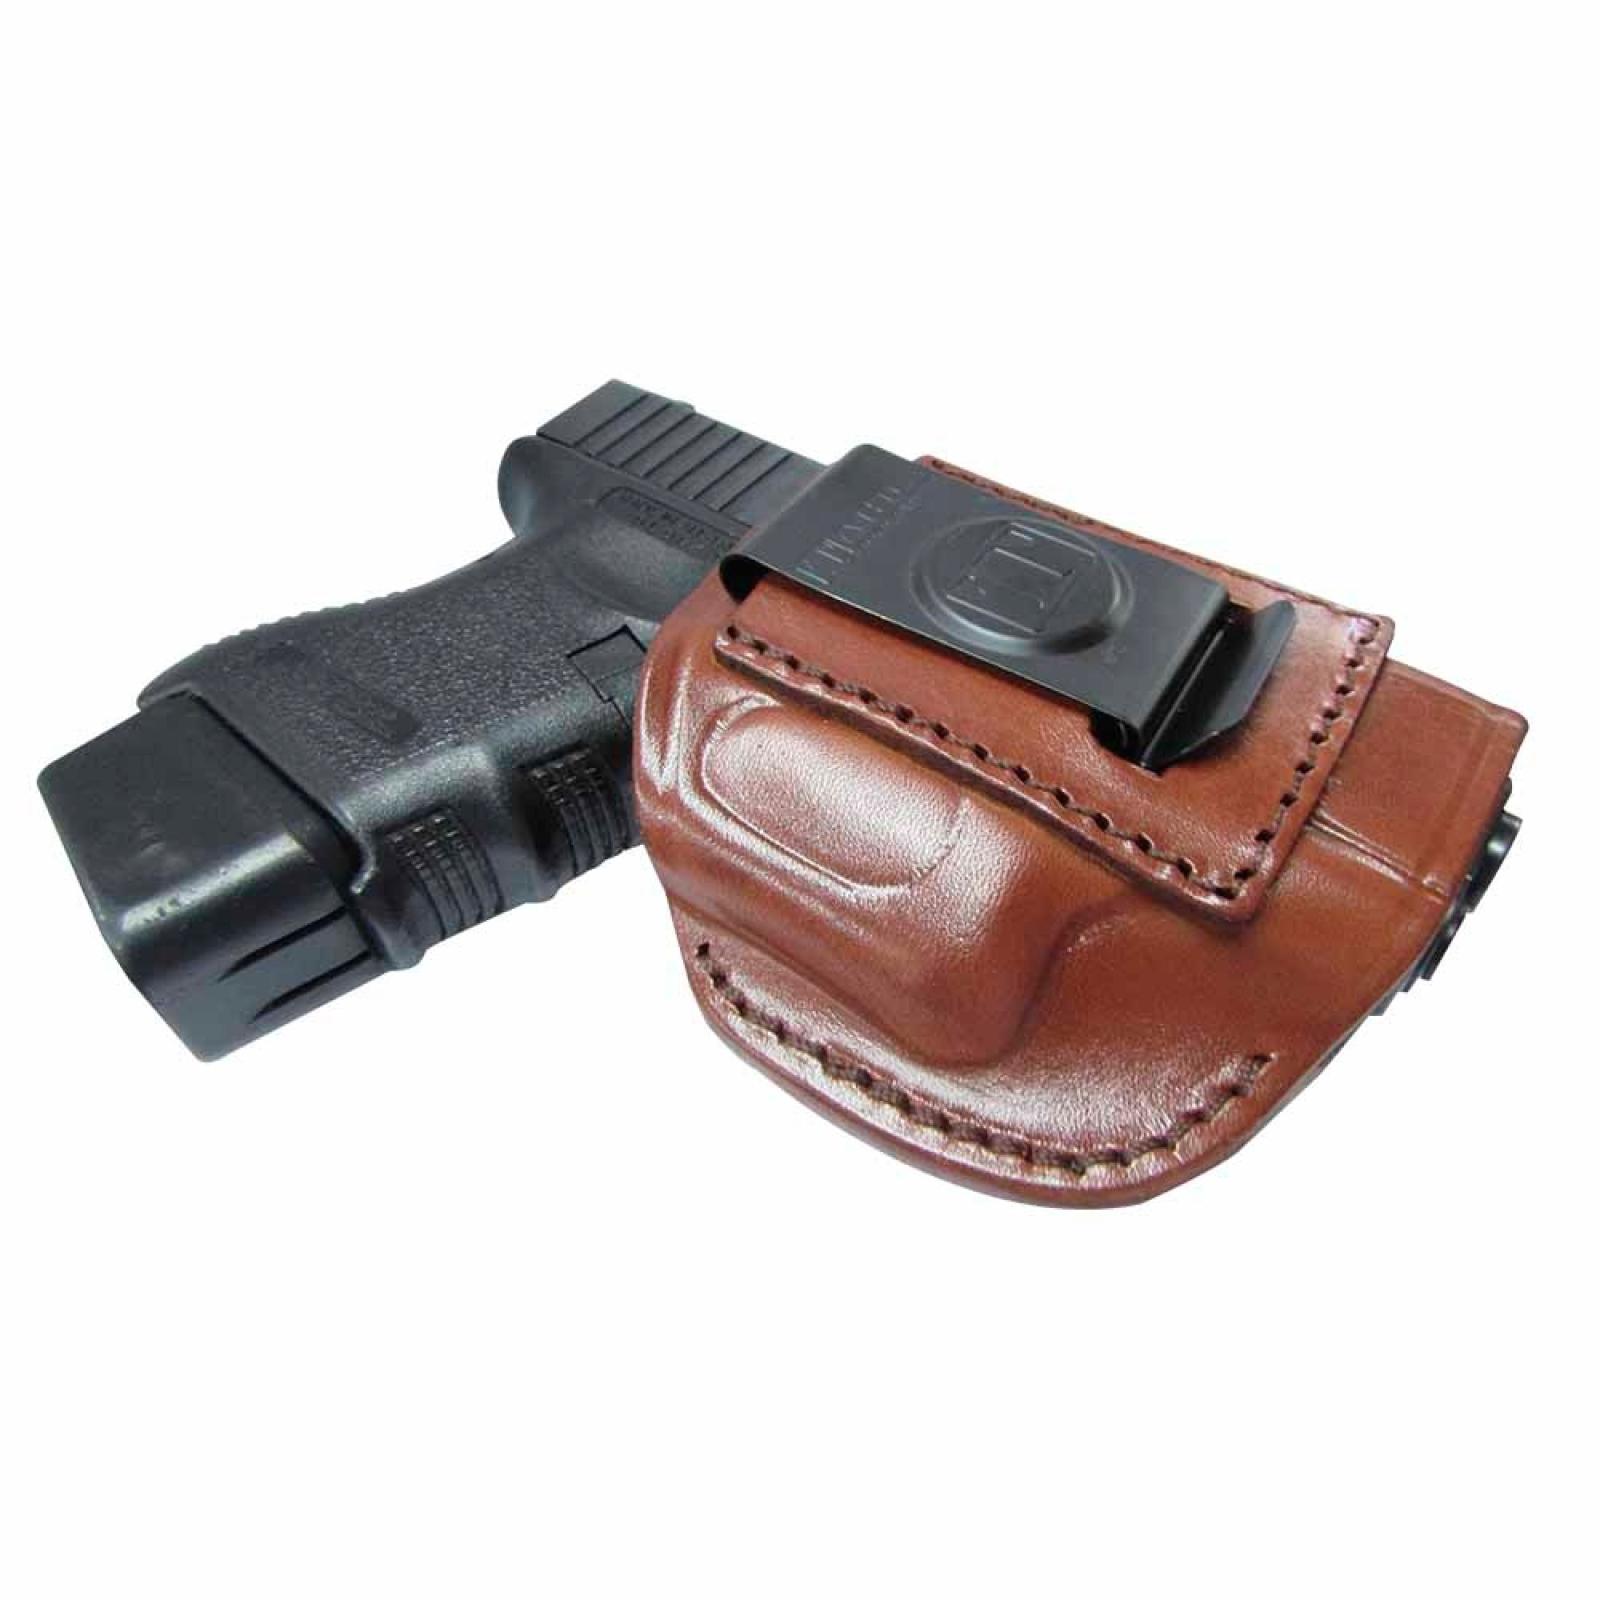 Ruger LCR Right Hand Holster 